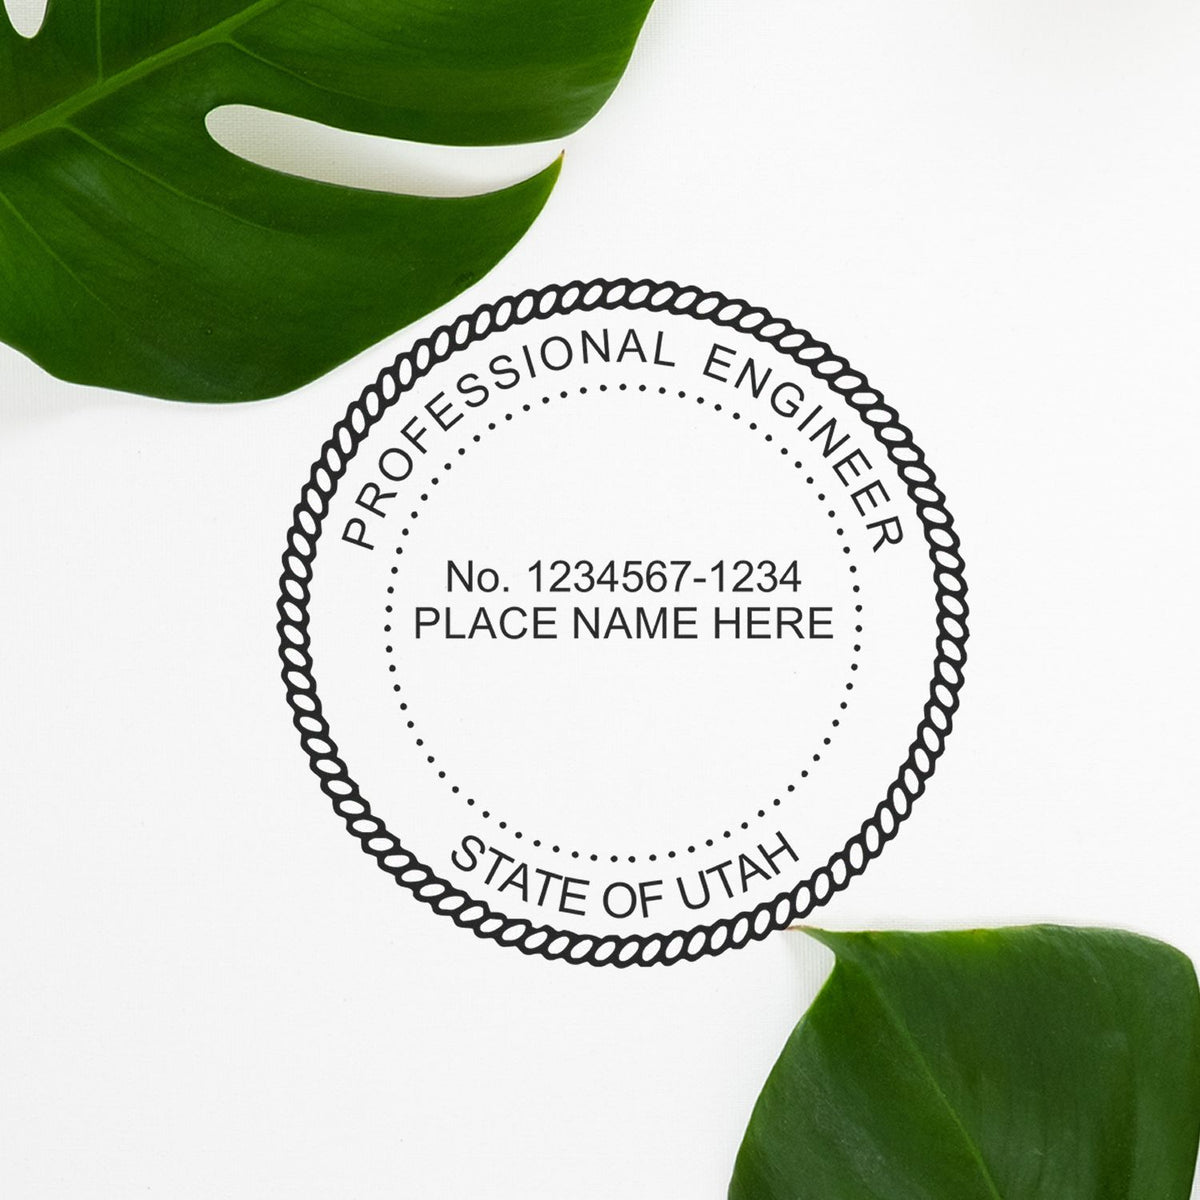 A stamped impression of the Slim Pre-Inked Utah Professional Engineer Seal Stamp in this stylish lifestyle photo, setting the tone for a unique and personalized product.